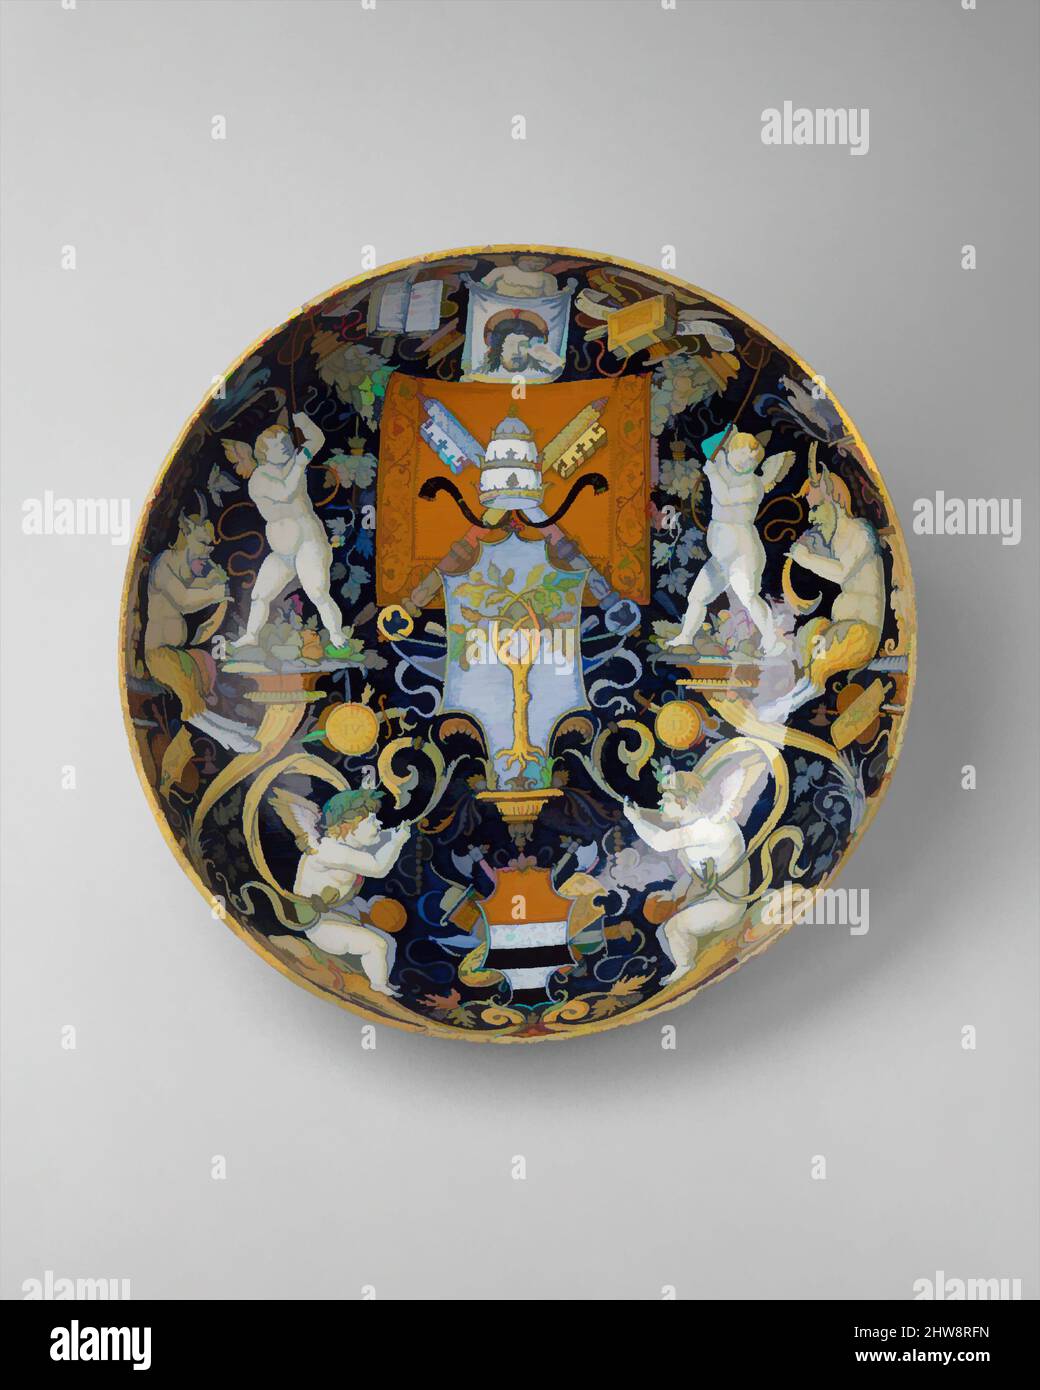 Art inspired by Bowl with the Arms of Pope Julius II and the Manzoli of Bologna surrounded by putti, cornucopiae, satyrs, dolphins, birds, etc., 1508, Italian, Castel Durante, Maiolica (tin-glazed earthenware), Height: 4 5/16 in. (10.9 cm.); Diameter: 12 13/16 in. (32.5 cm), Ceramics-, Classic works modernized by Artotop with a splash of modernity. Shapes, color and value, eye-catching visual impact on art. Emotions through freedom of artworks in a contemporary way. A timeless message pursuing a wildly creative new direction. Artists turning to the digital medium and creating the Artotop NFT Stock Photo